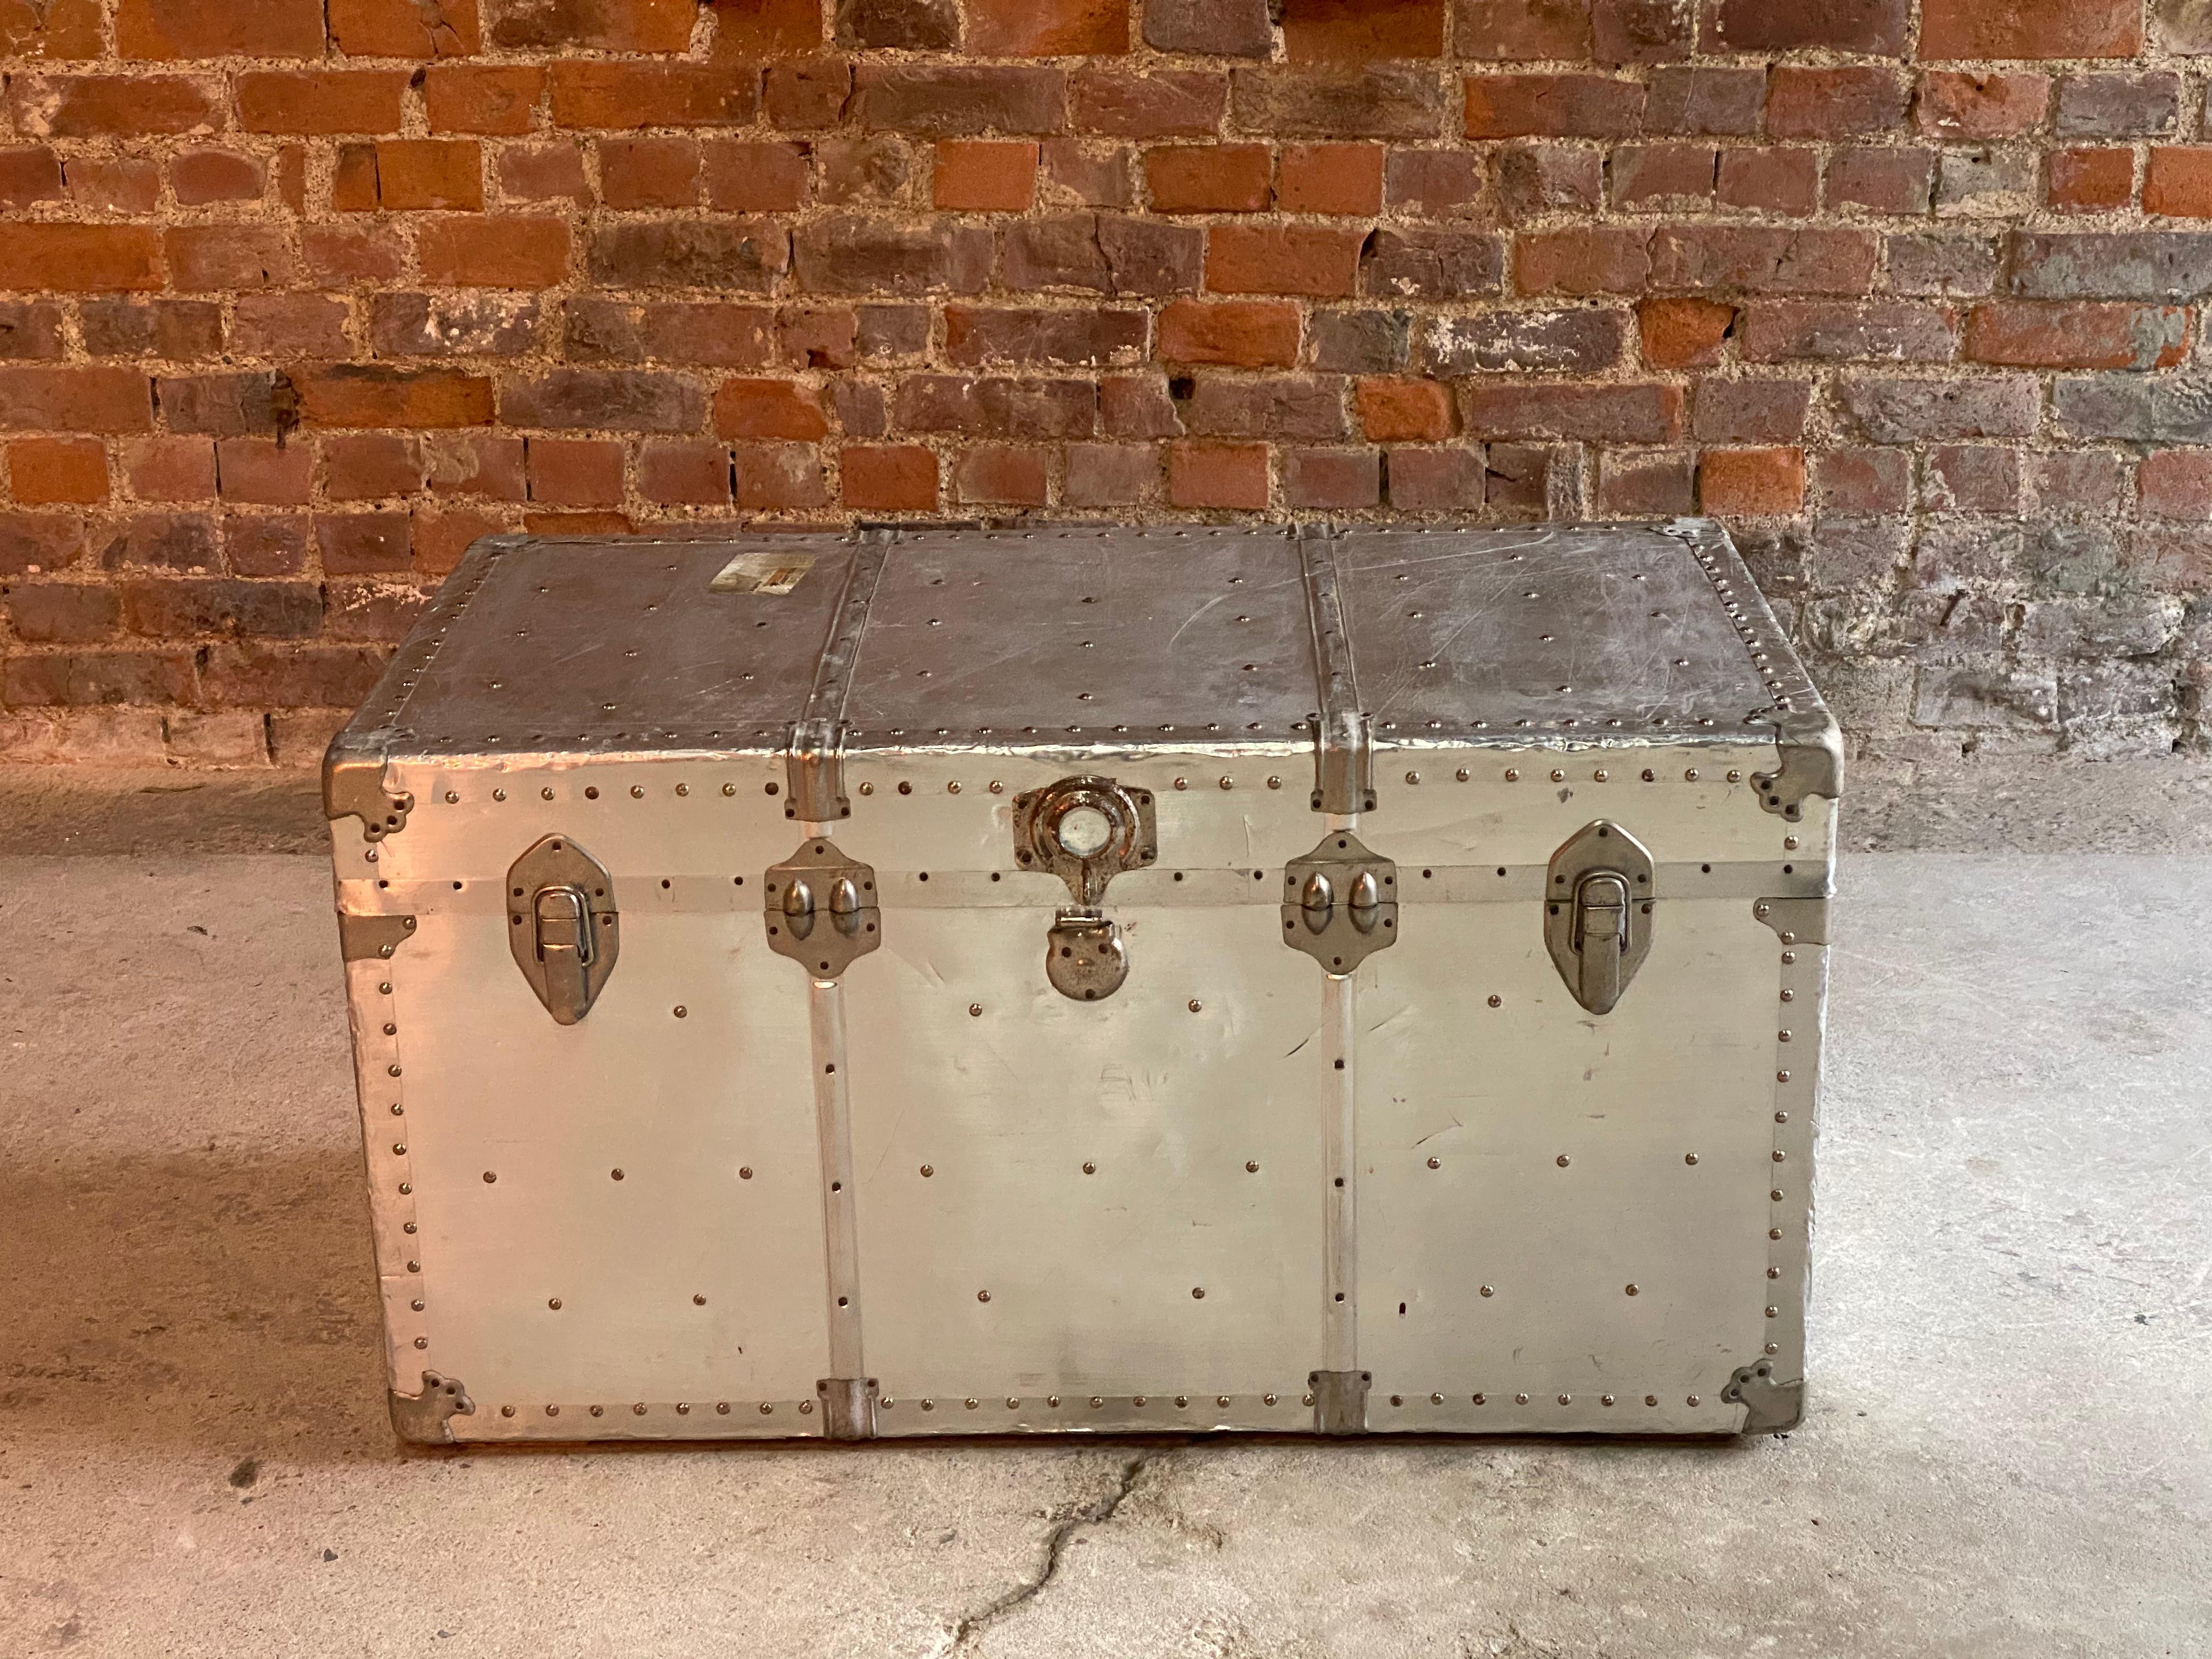 Industrial aviation aluminium travel trunk coffee table circa 1940

Industrial aviation aluminium travel trunk circa 1940, a genuine travelling trunk with hinged lid, the trunk having studded outline and heavy locks and clasps, riveted all-over